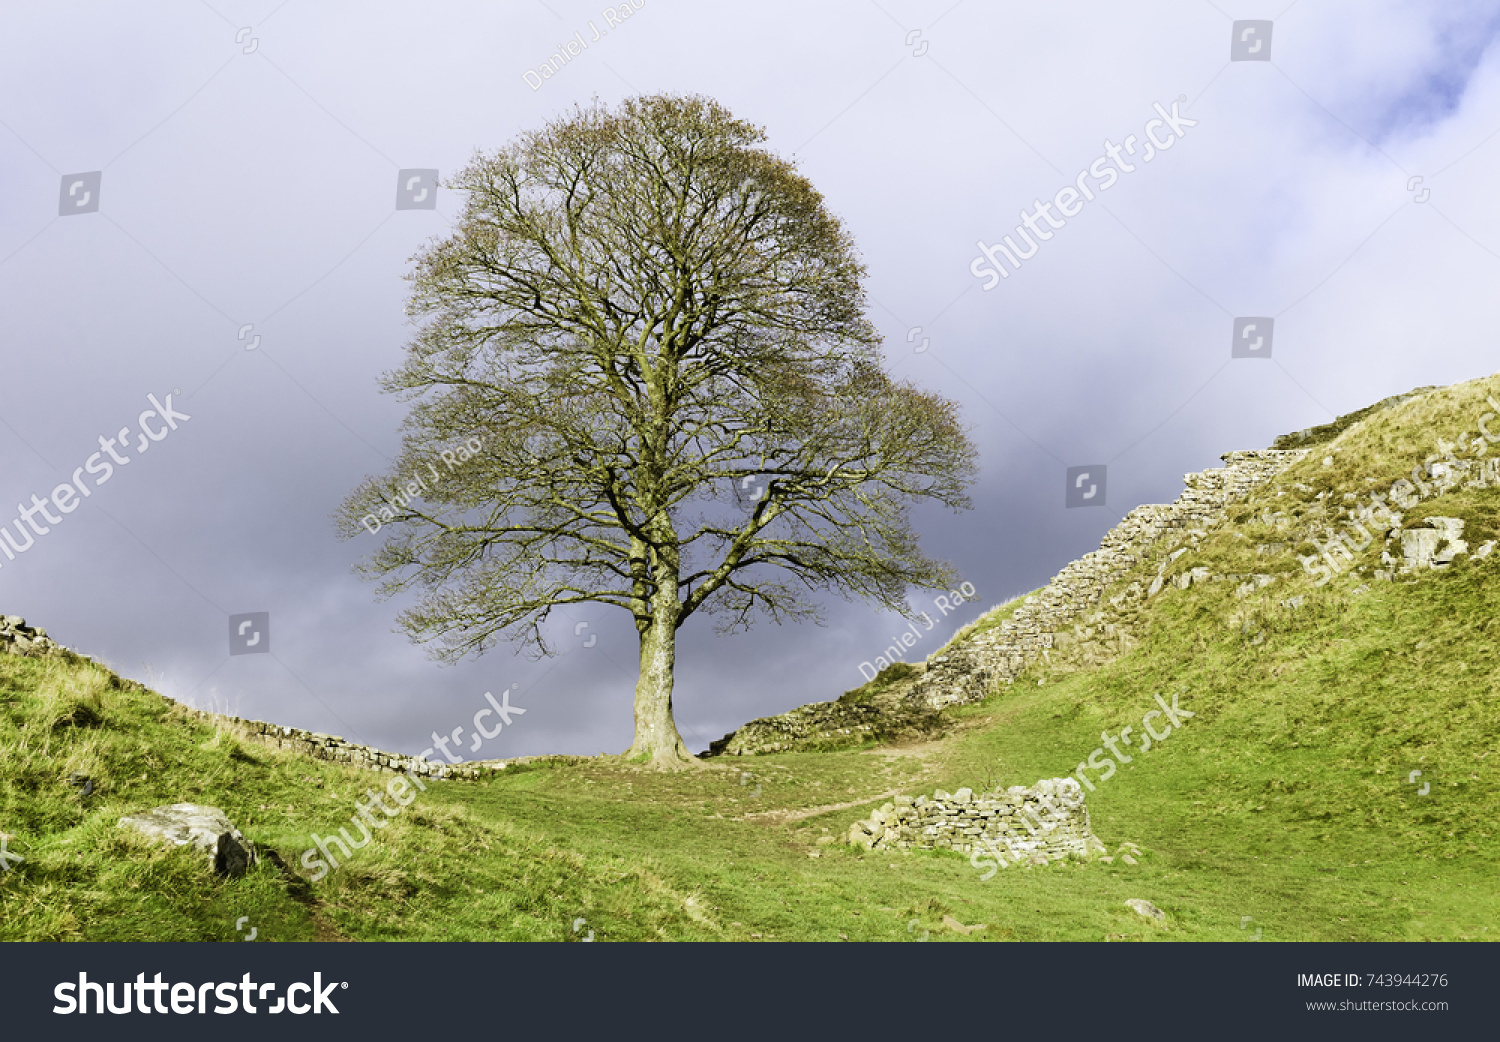 Hexham, Northumberland, UK. Sycamore tree in autumn with a view of Hadrian's Wall along contours of hills and a a bright clouded sky in Northumberland National Park near Hexham, Northumberland, UK. #743944276